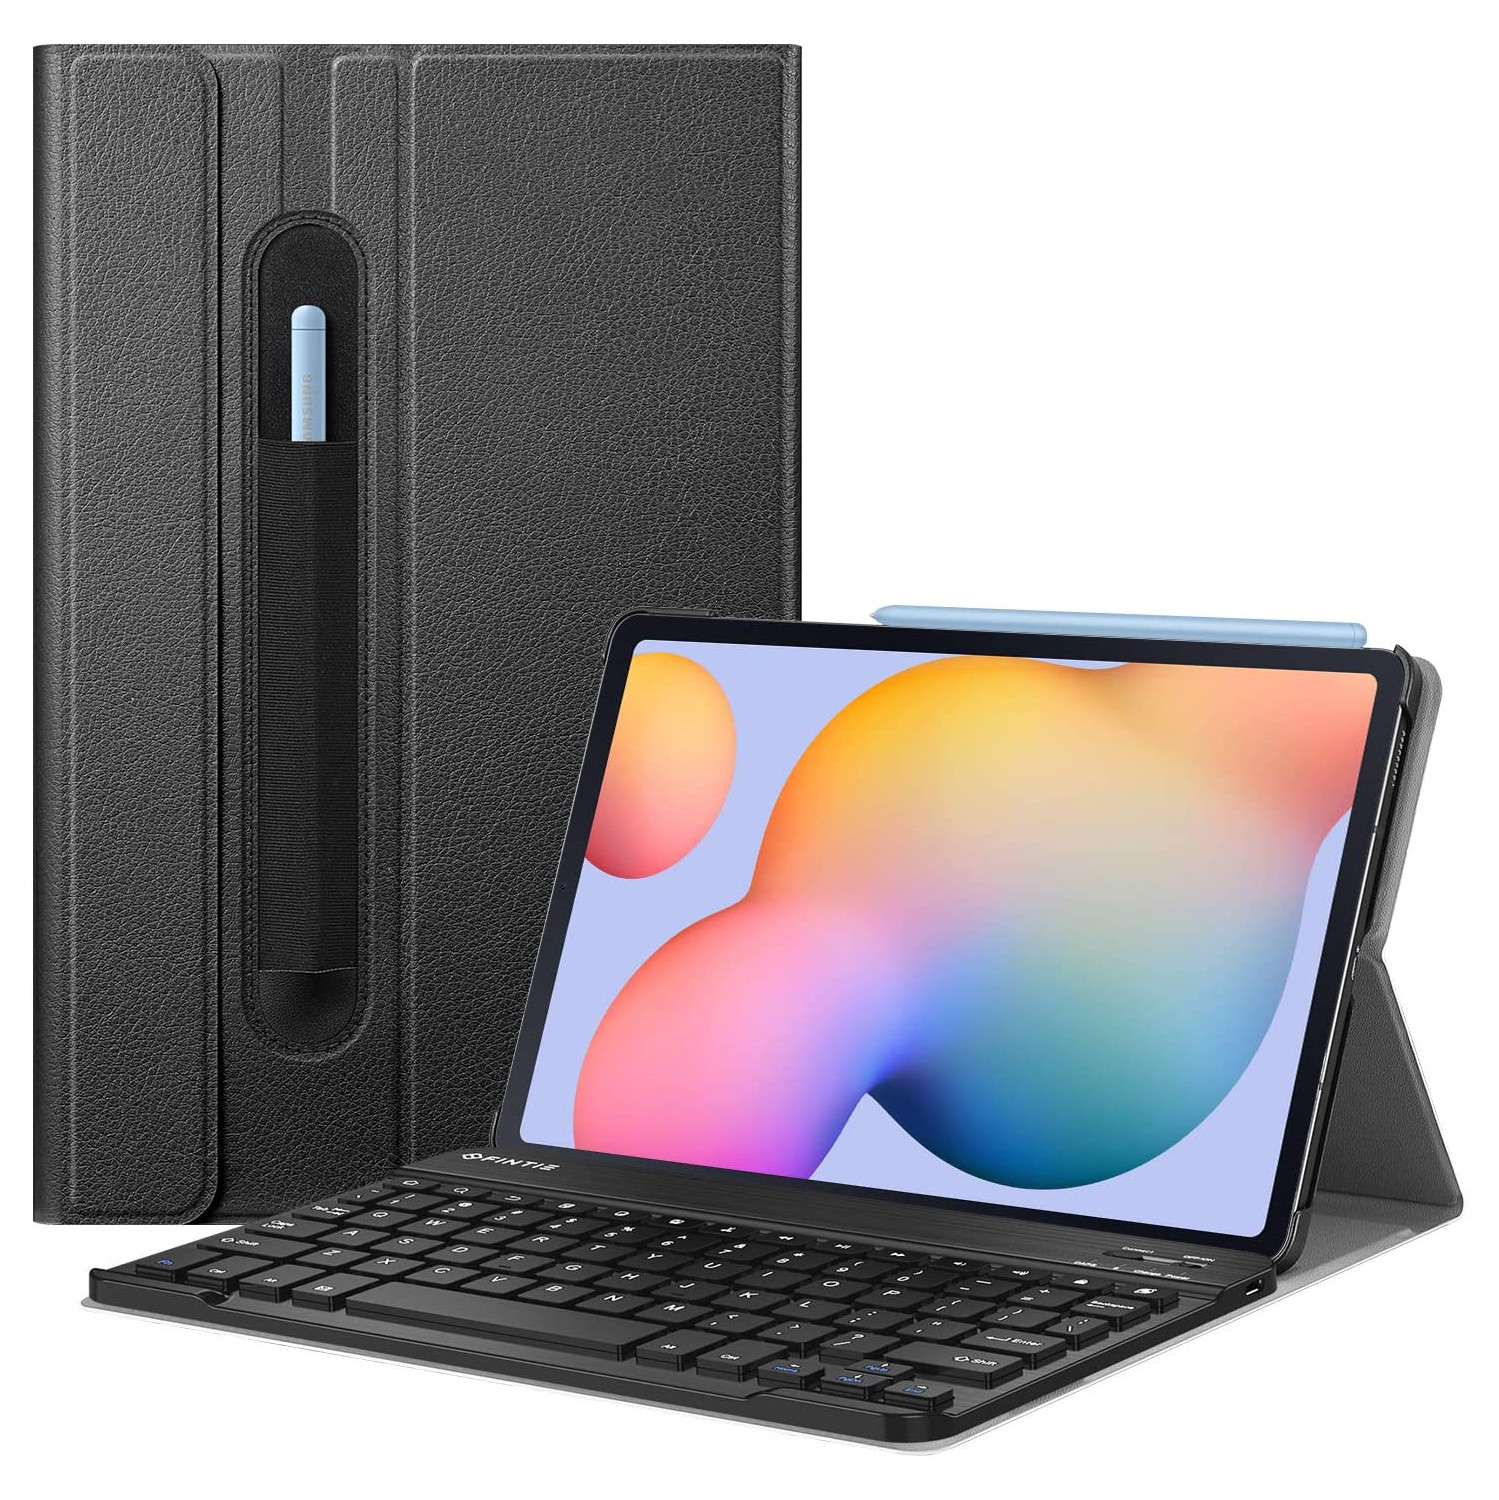 F Keyboard Case for Samsung Galaxy Tab S6 Lite 10.4 inch 2022/2020 Model (SM-P610/P613/P615/P619), Slim Stand Cover with Secure S Pen Holder Detachable Wireless Bluetooth Keyboard